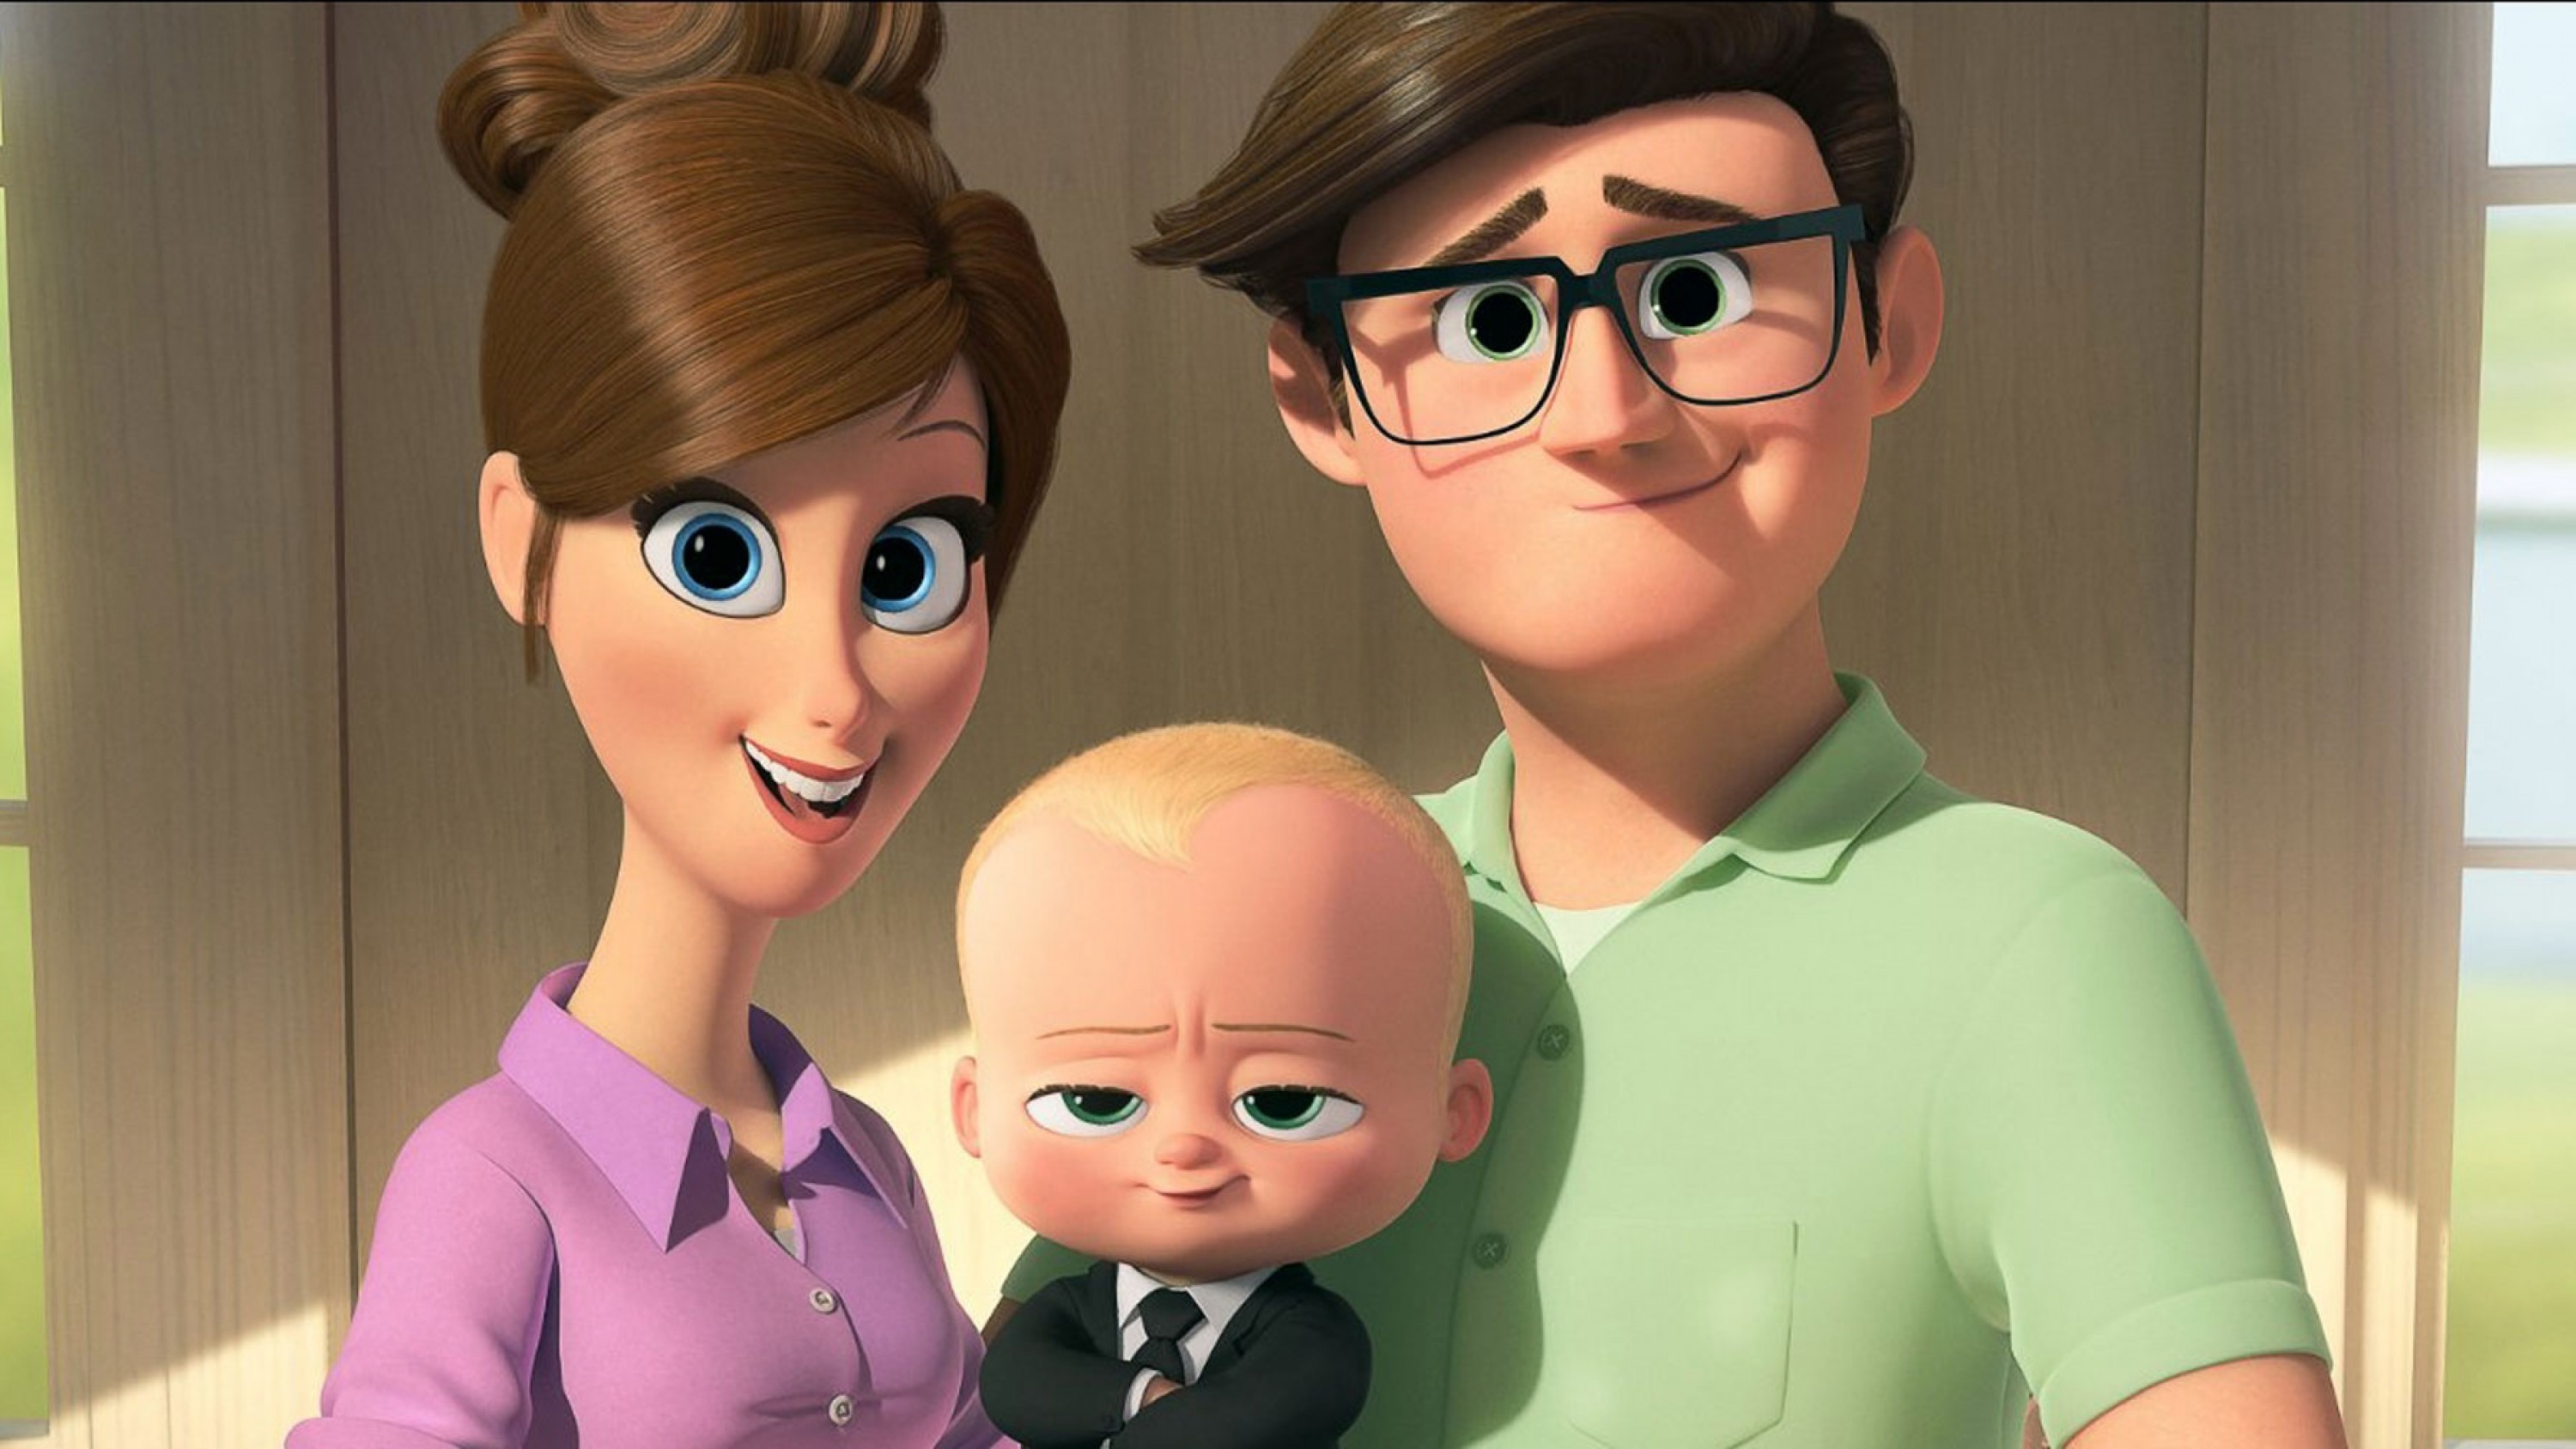 Resource - The Boss Baby: Film Guide - Into Film